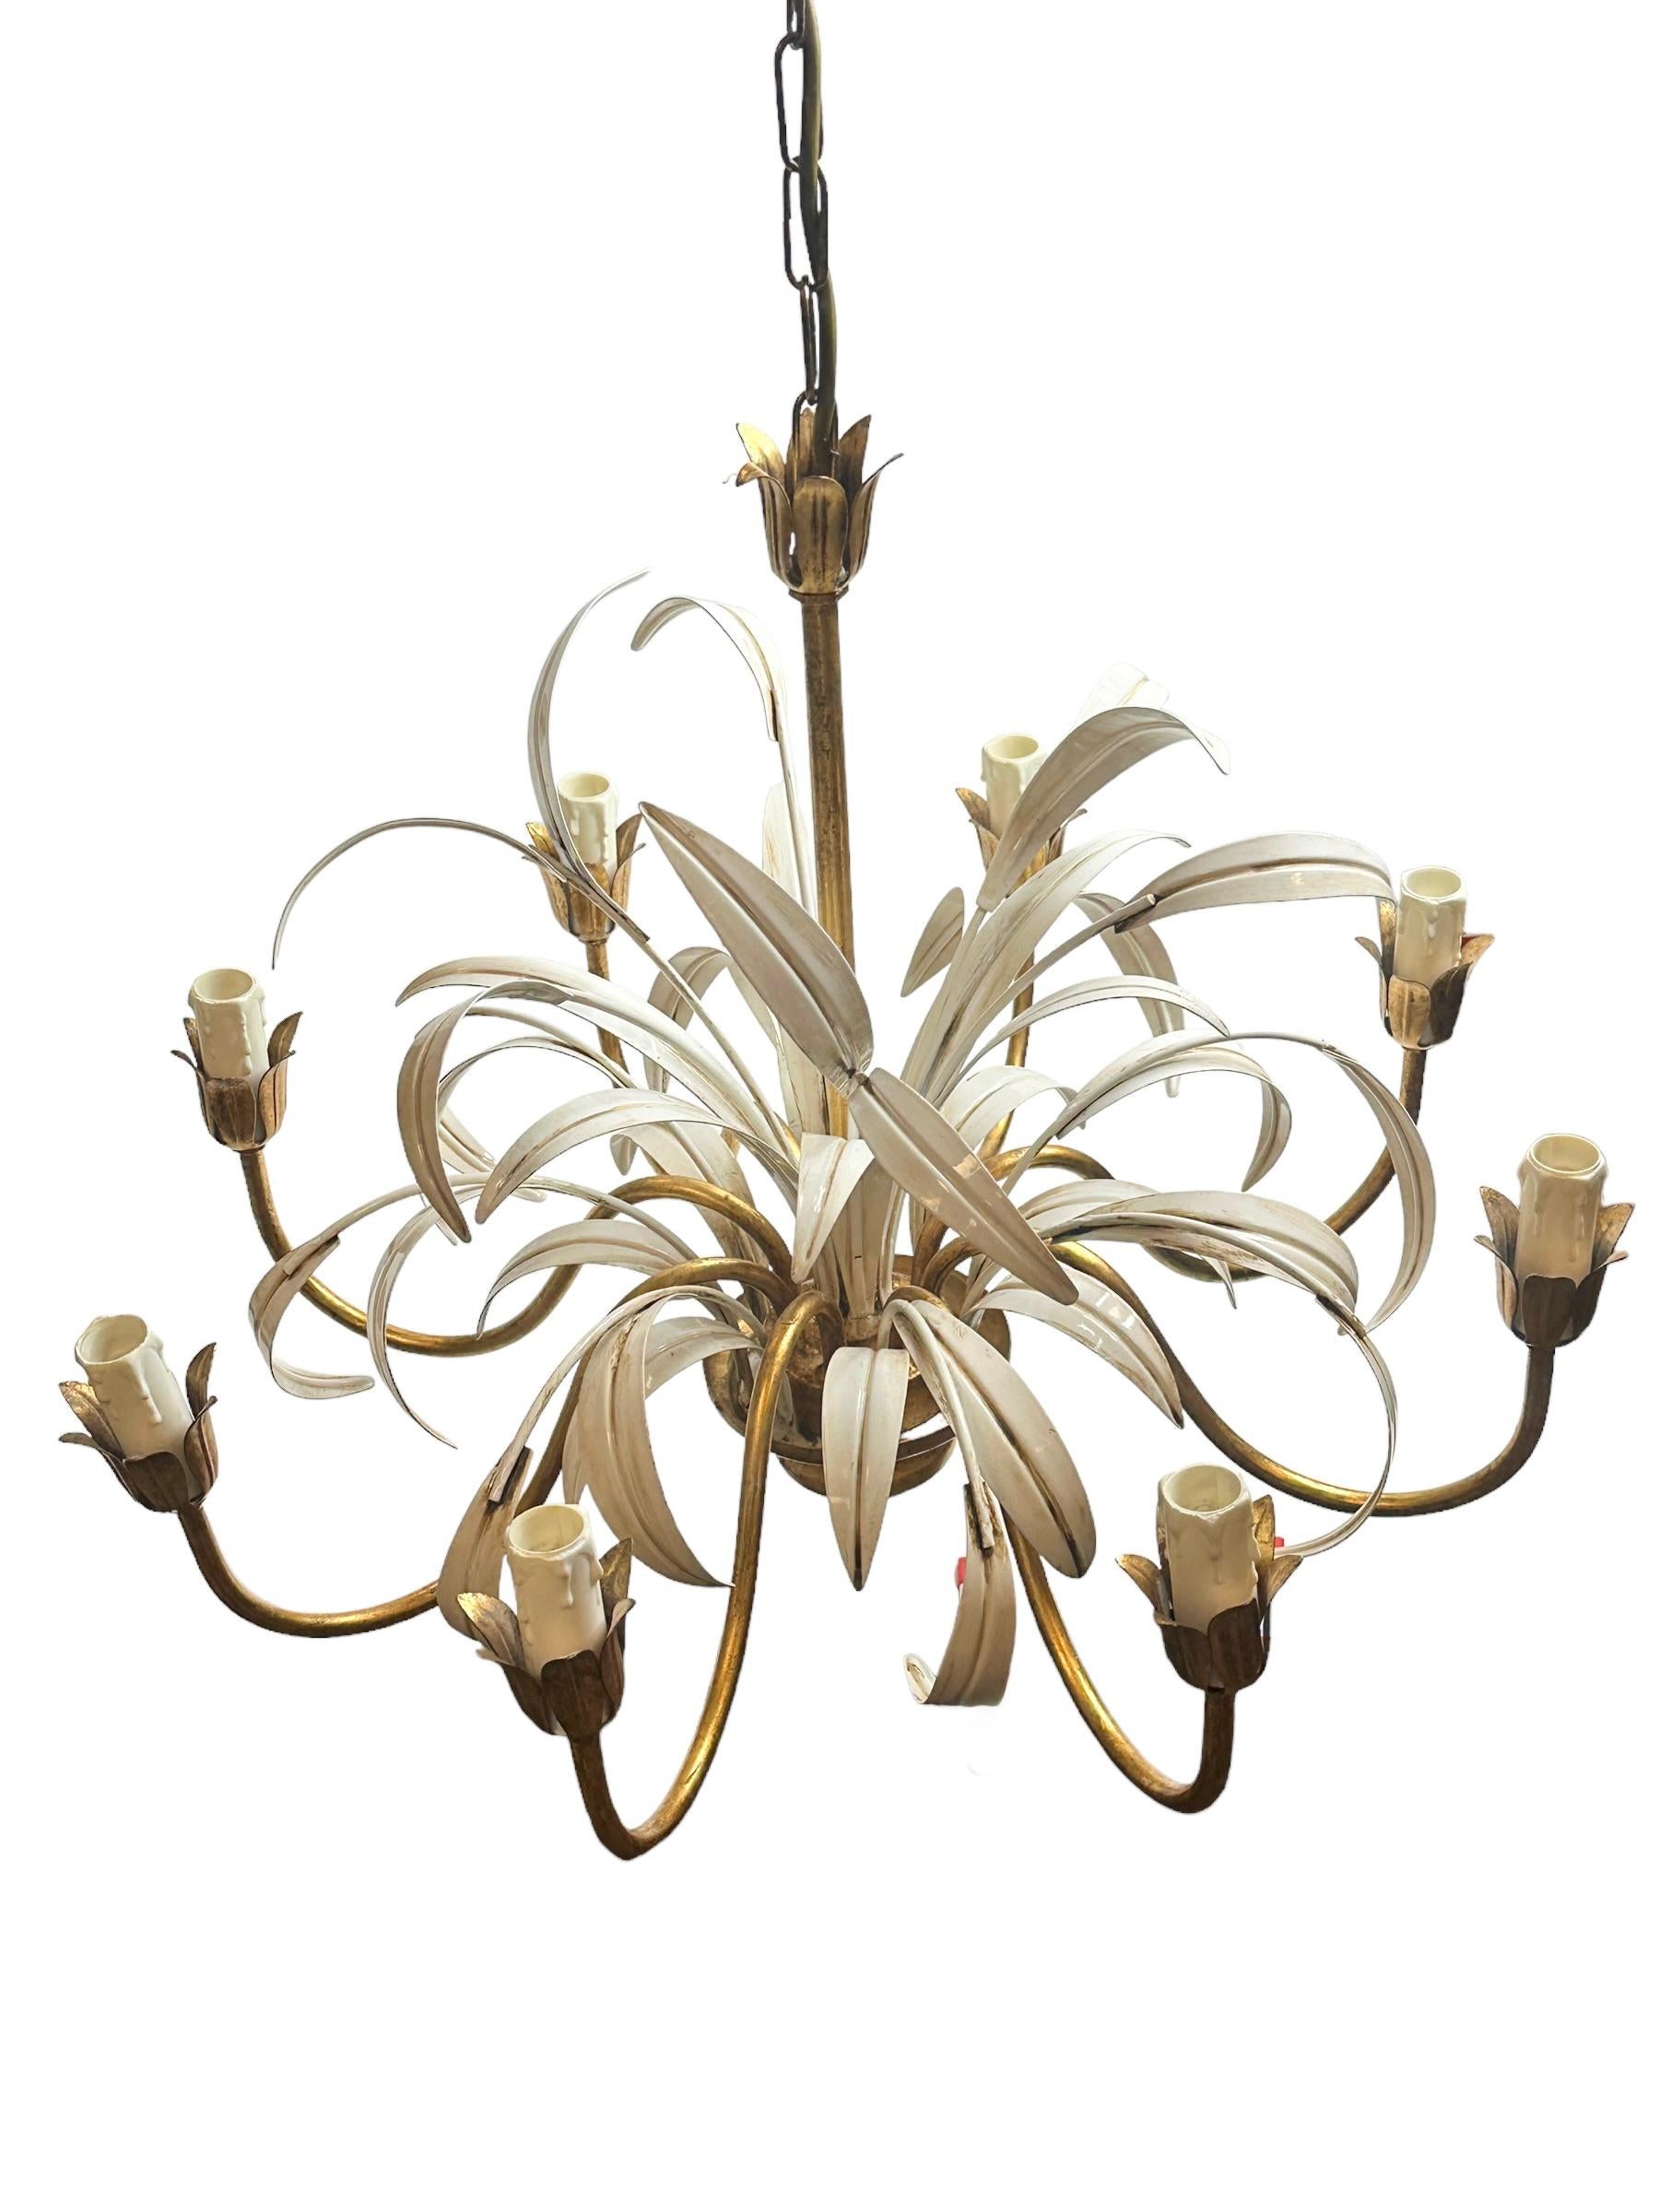 8-Light Gilt Metal Reed Leaf Chandelier Tole Toleware Coco Chanel Style, Italy For Sale 3